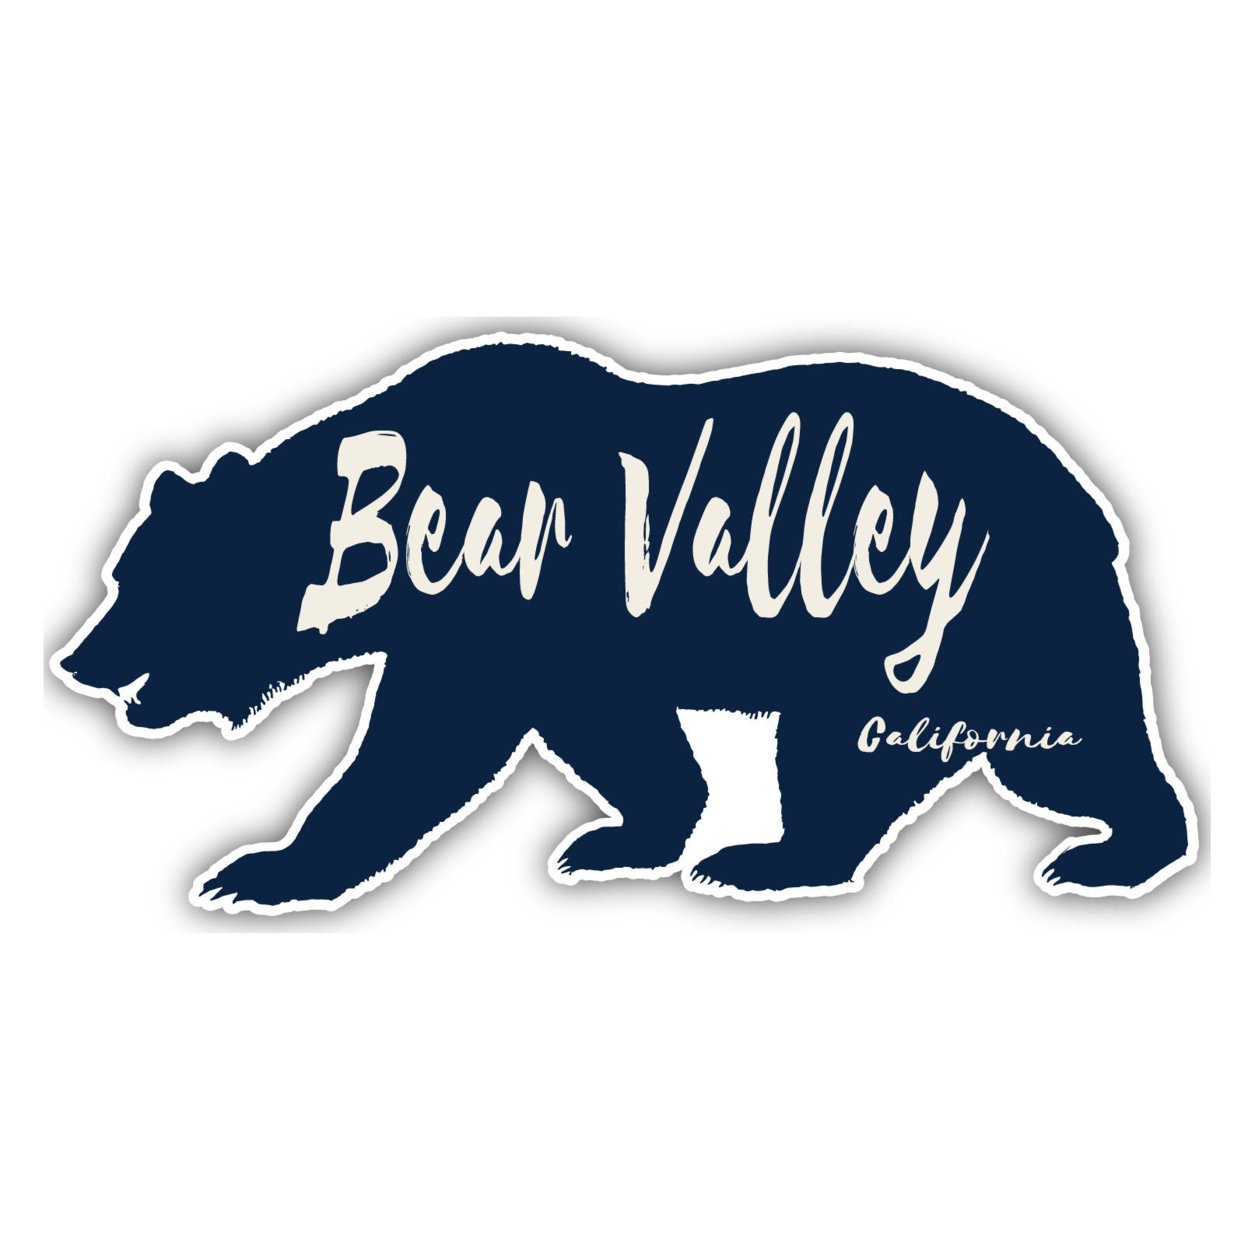 Bear Valley California Souvenir Decorative Stickers (Choose Theme And Size) - 4-Pack, 8-Inch, Great Outdoors